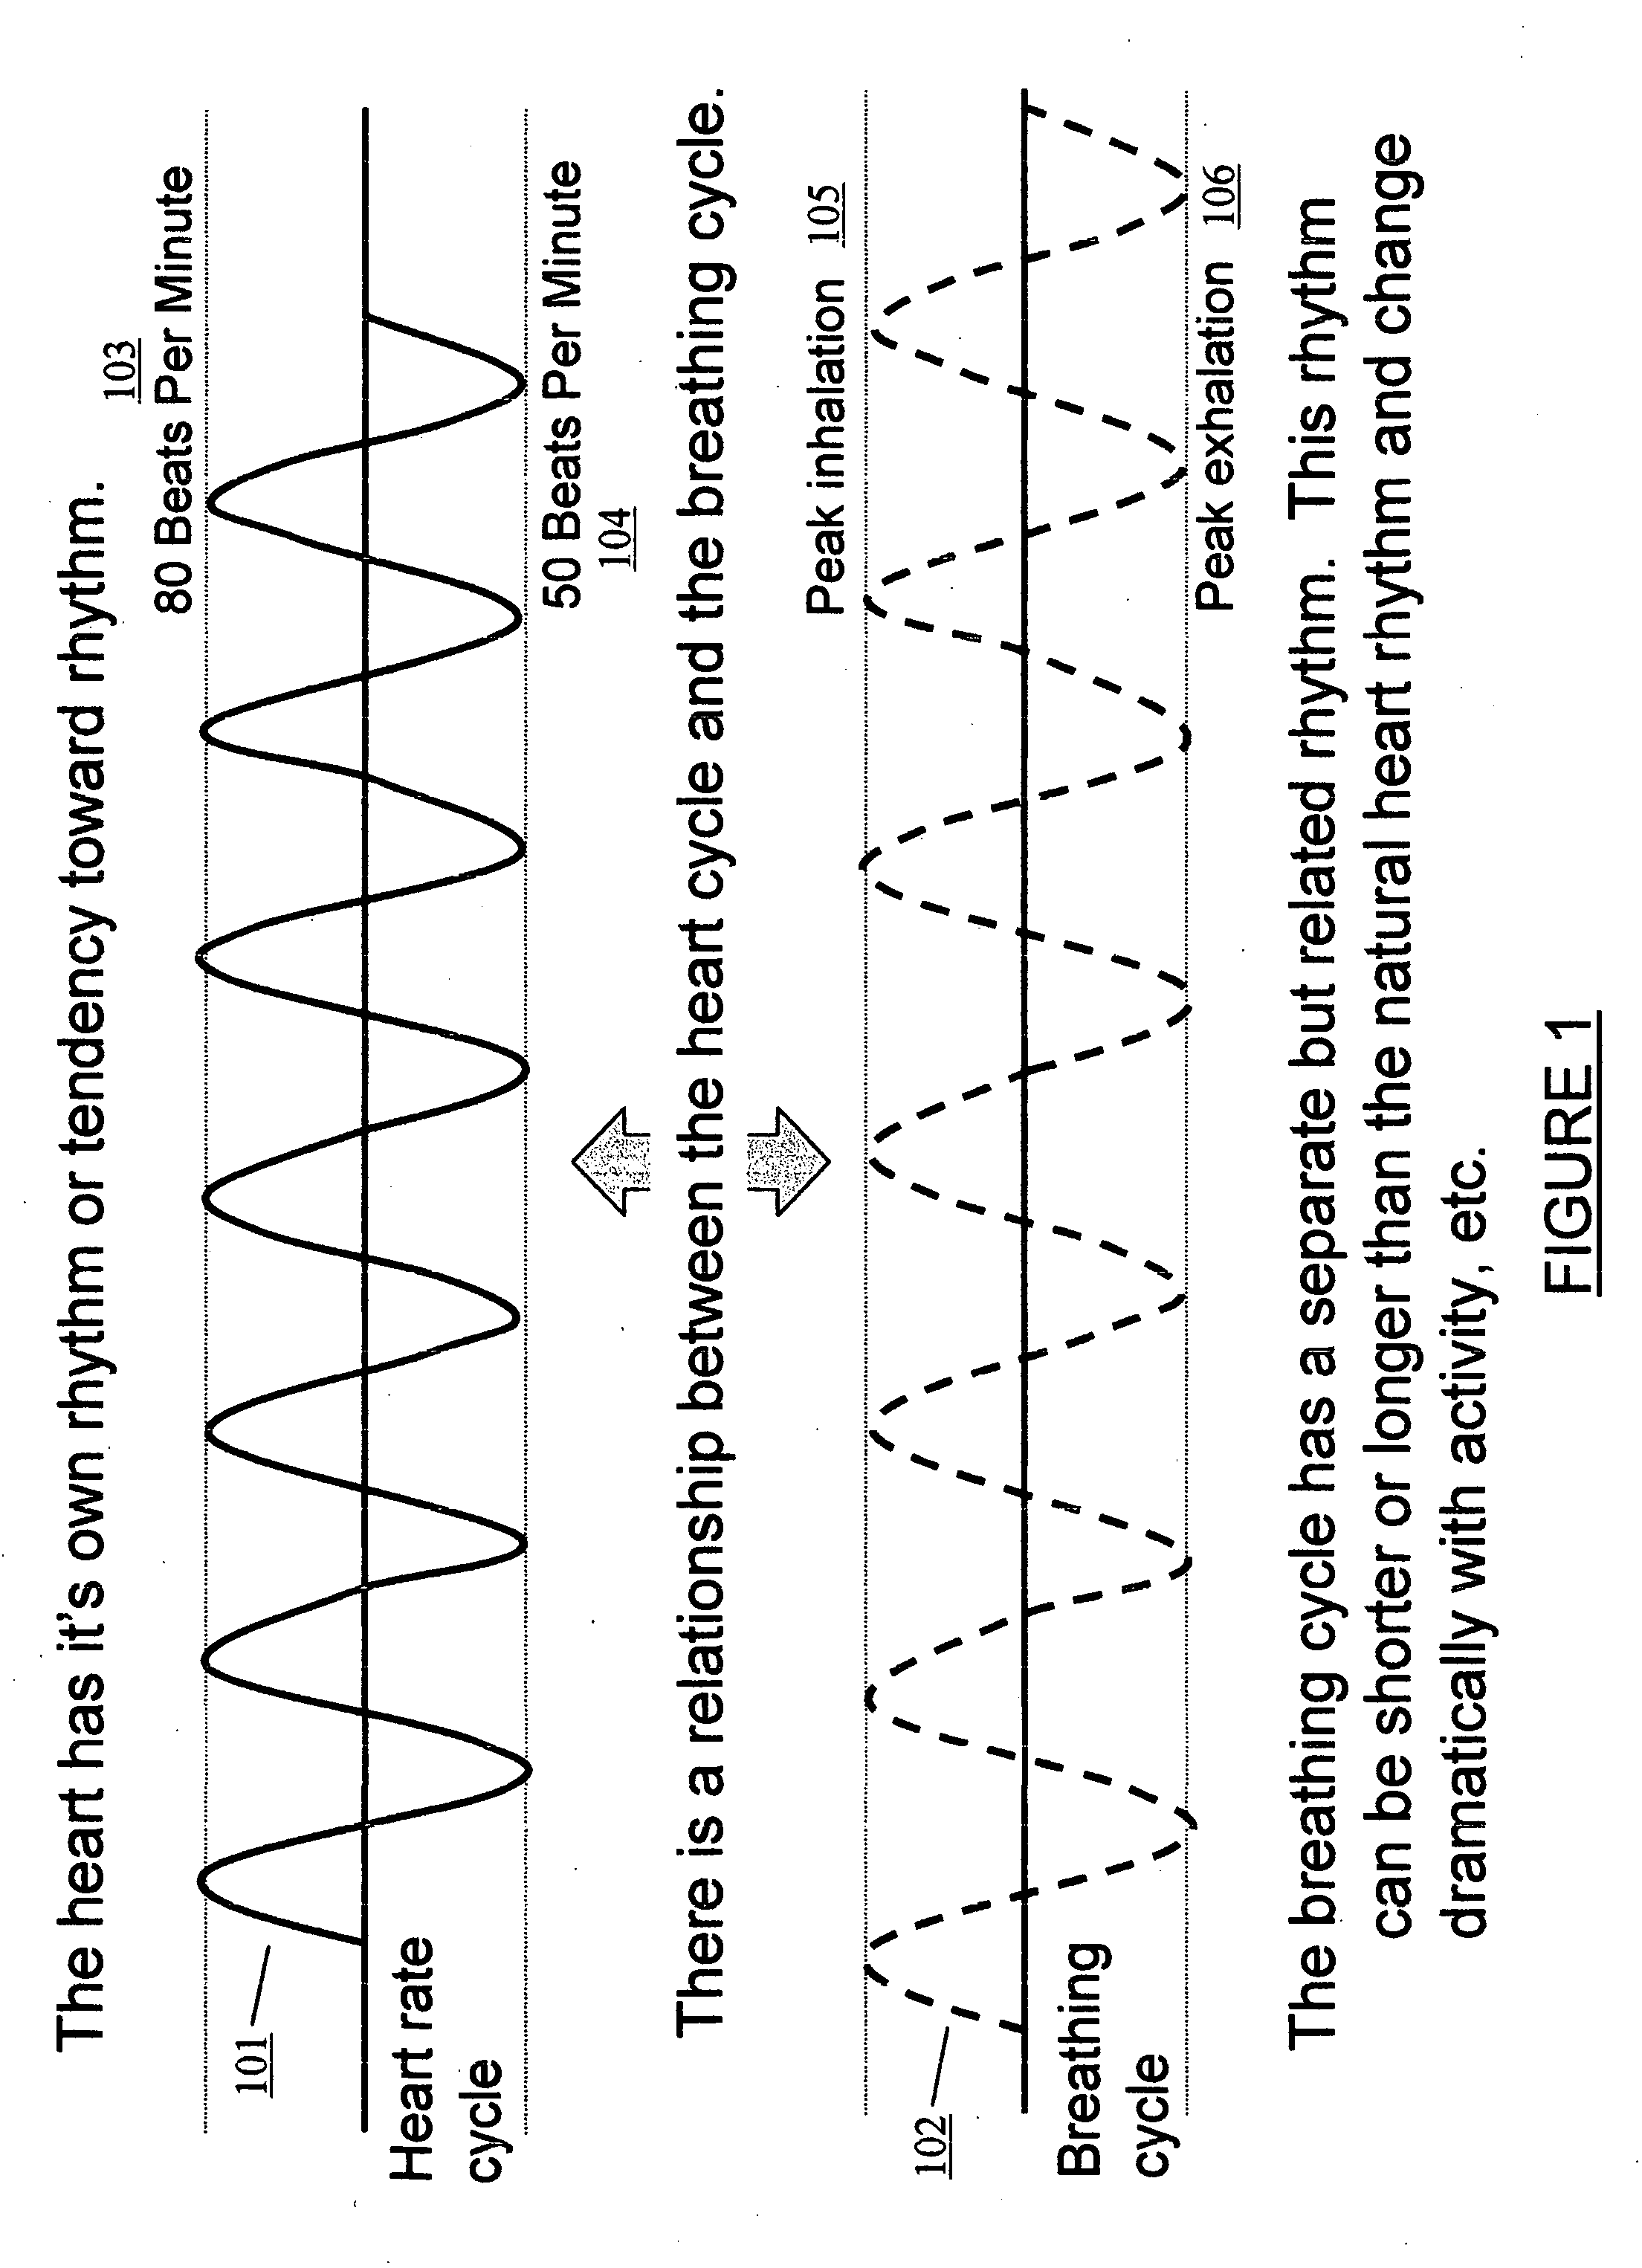 Method and system for achieving heart rate variability coherence during exercise